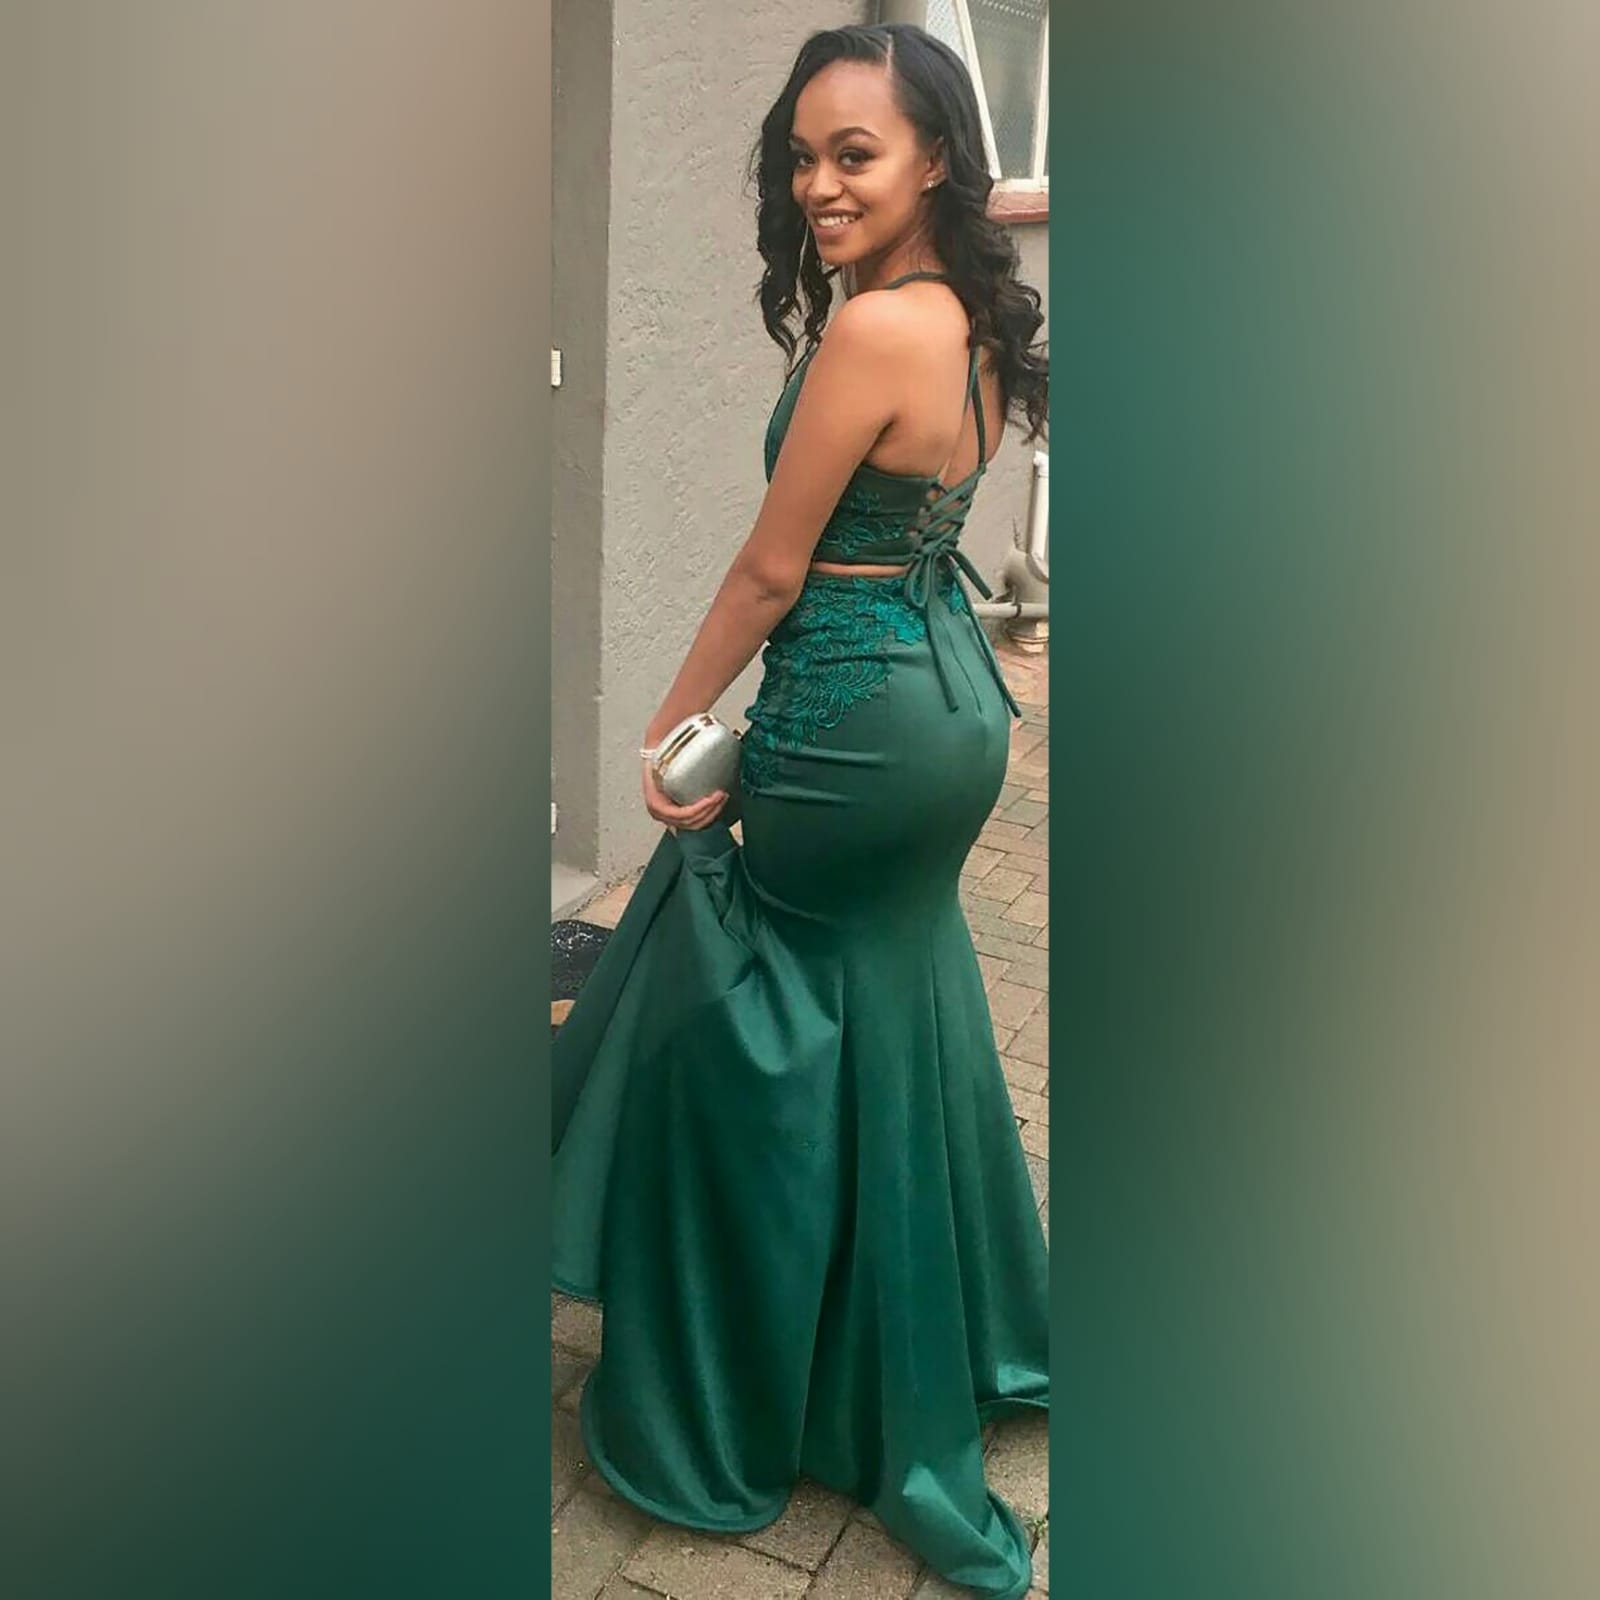 2 piece emerald green mermaid matric dance dress 6 2 piece emerald green mermaid matric dance dress. A gorgeous crop top with a lace-up open back, with a mermaid skirt. Lace detail on skirt and top for a classic touch.